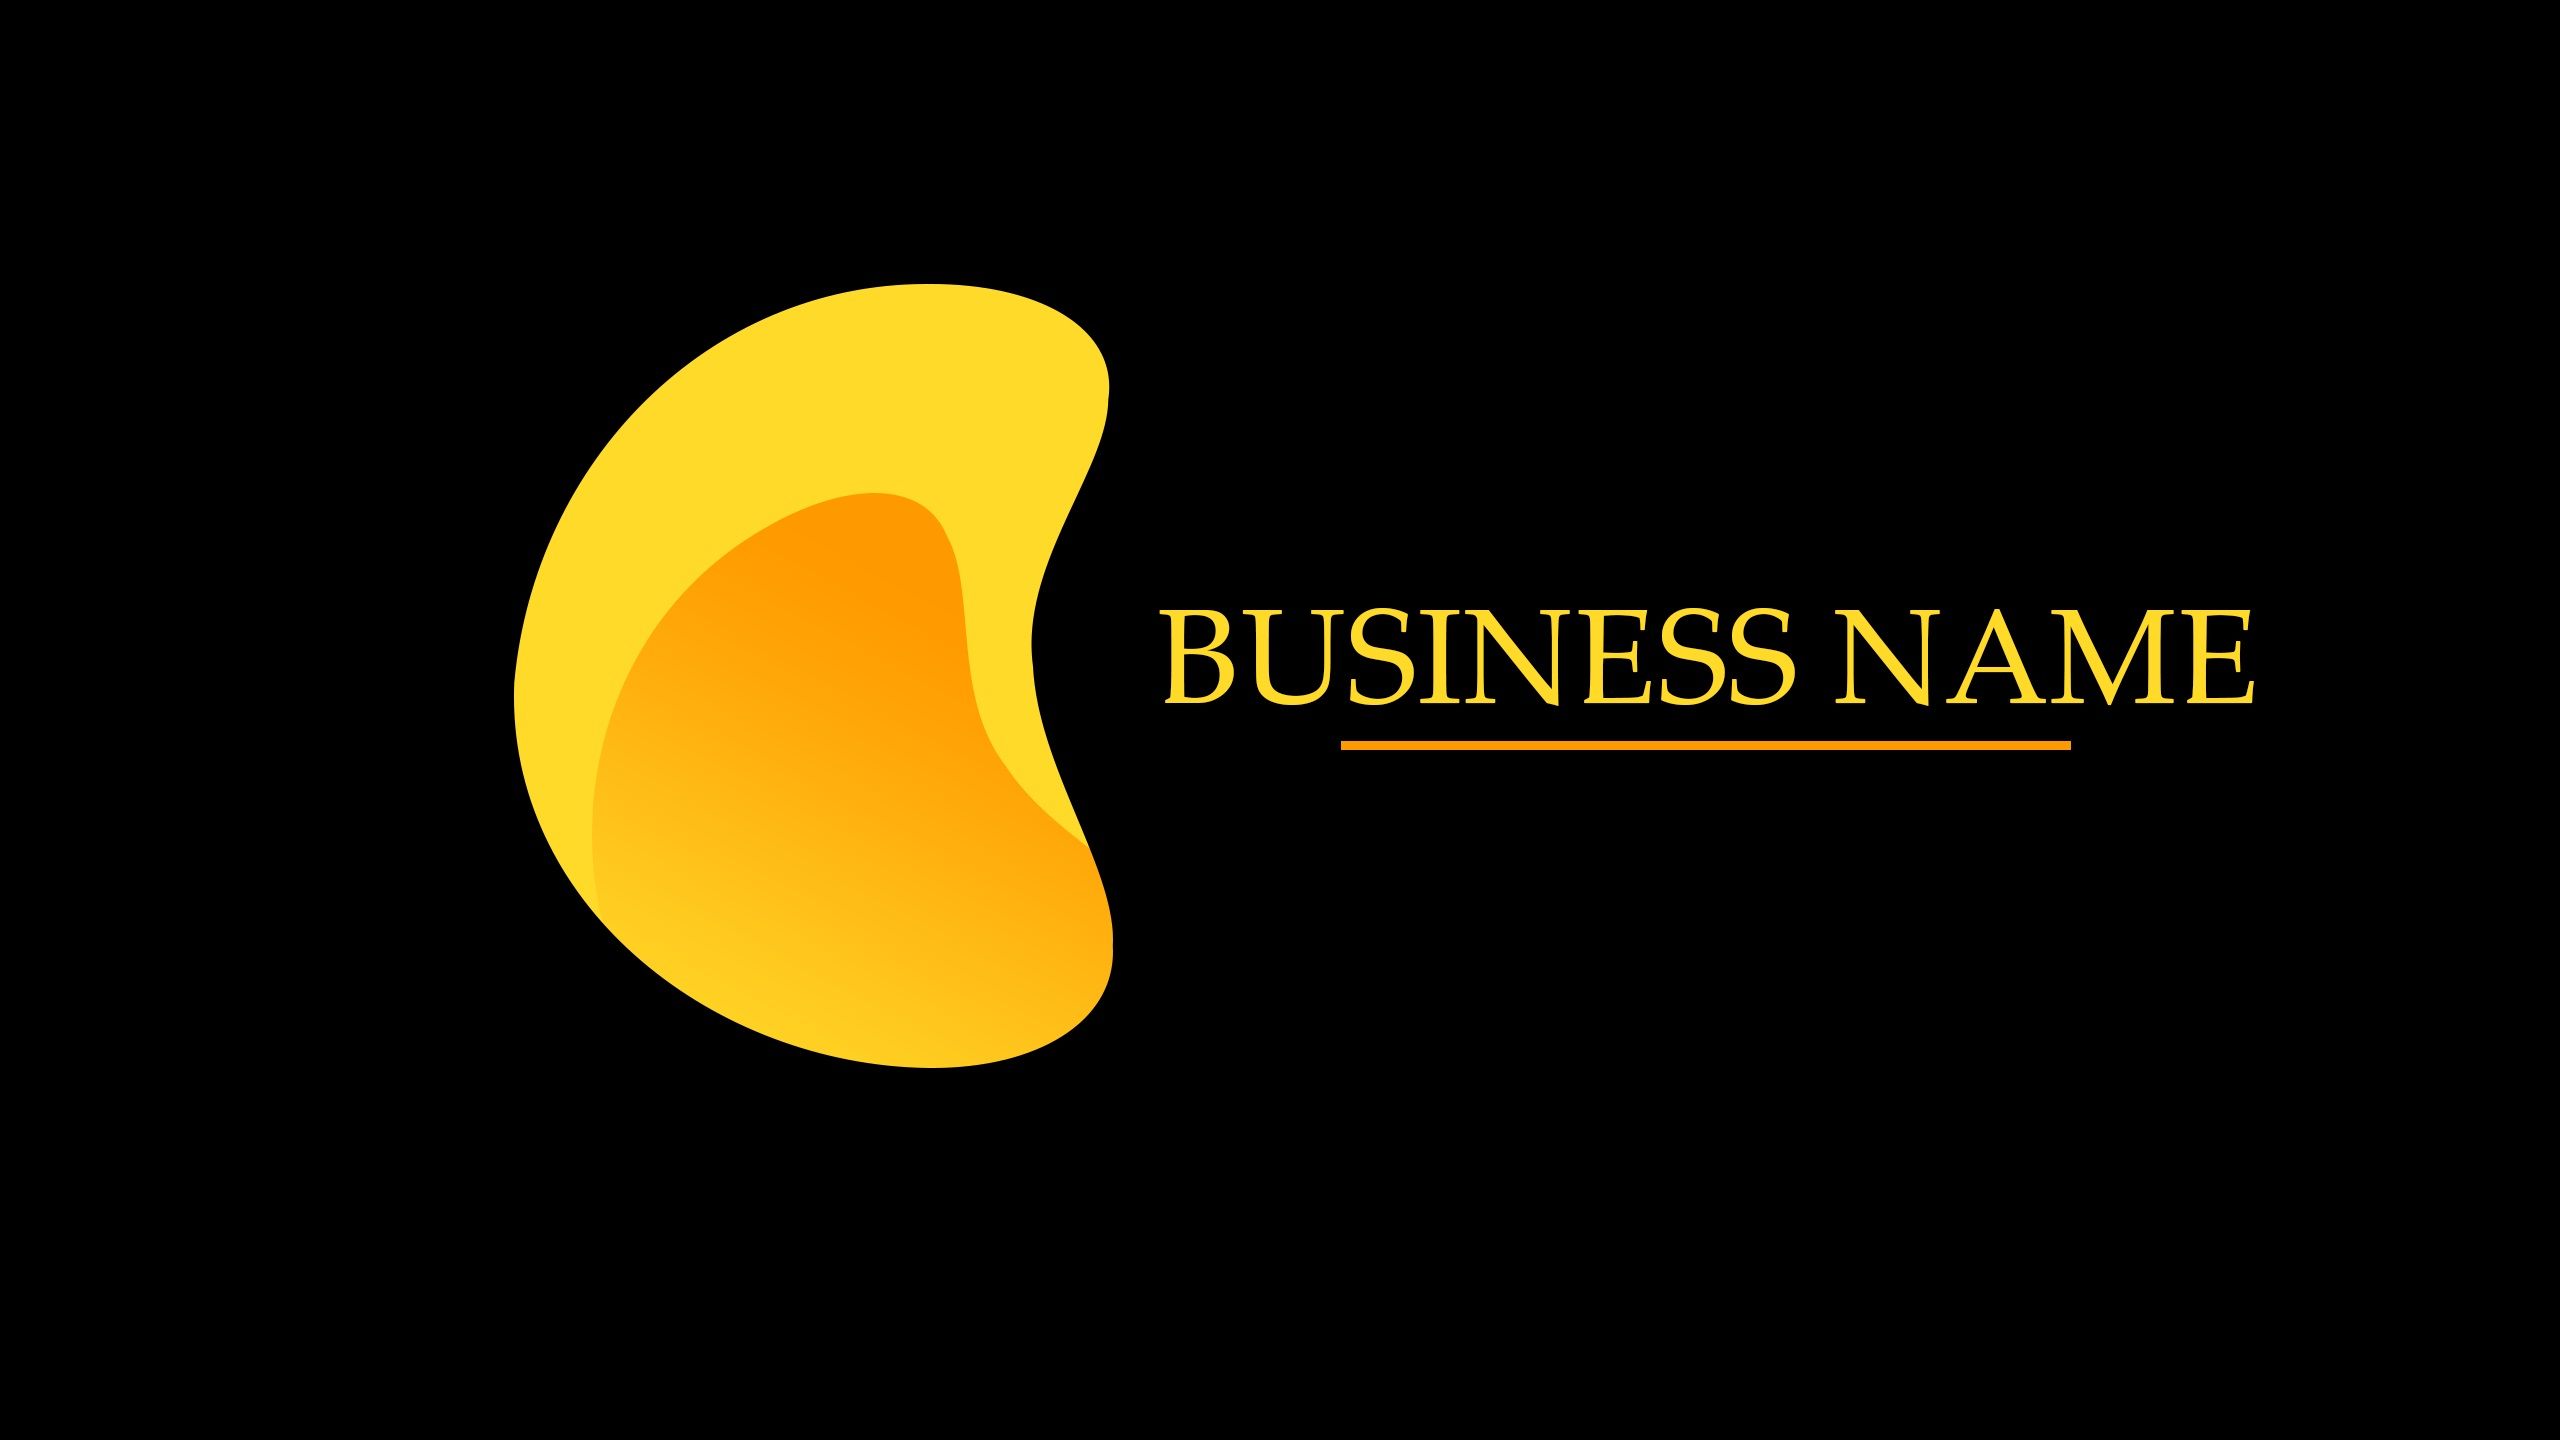 Why logo for business is important?